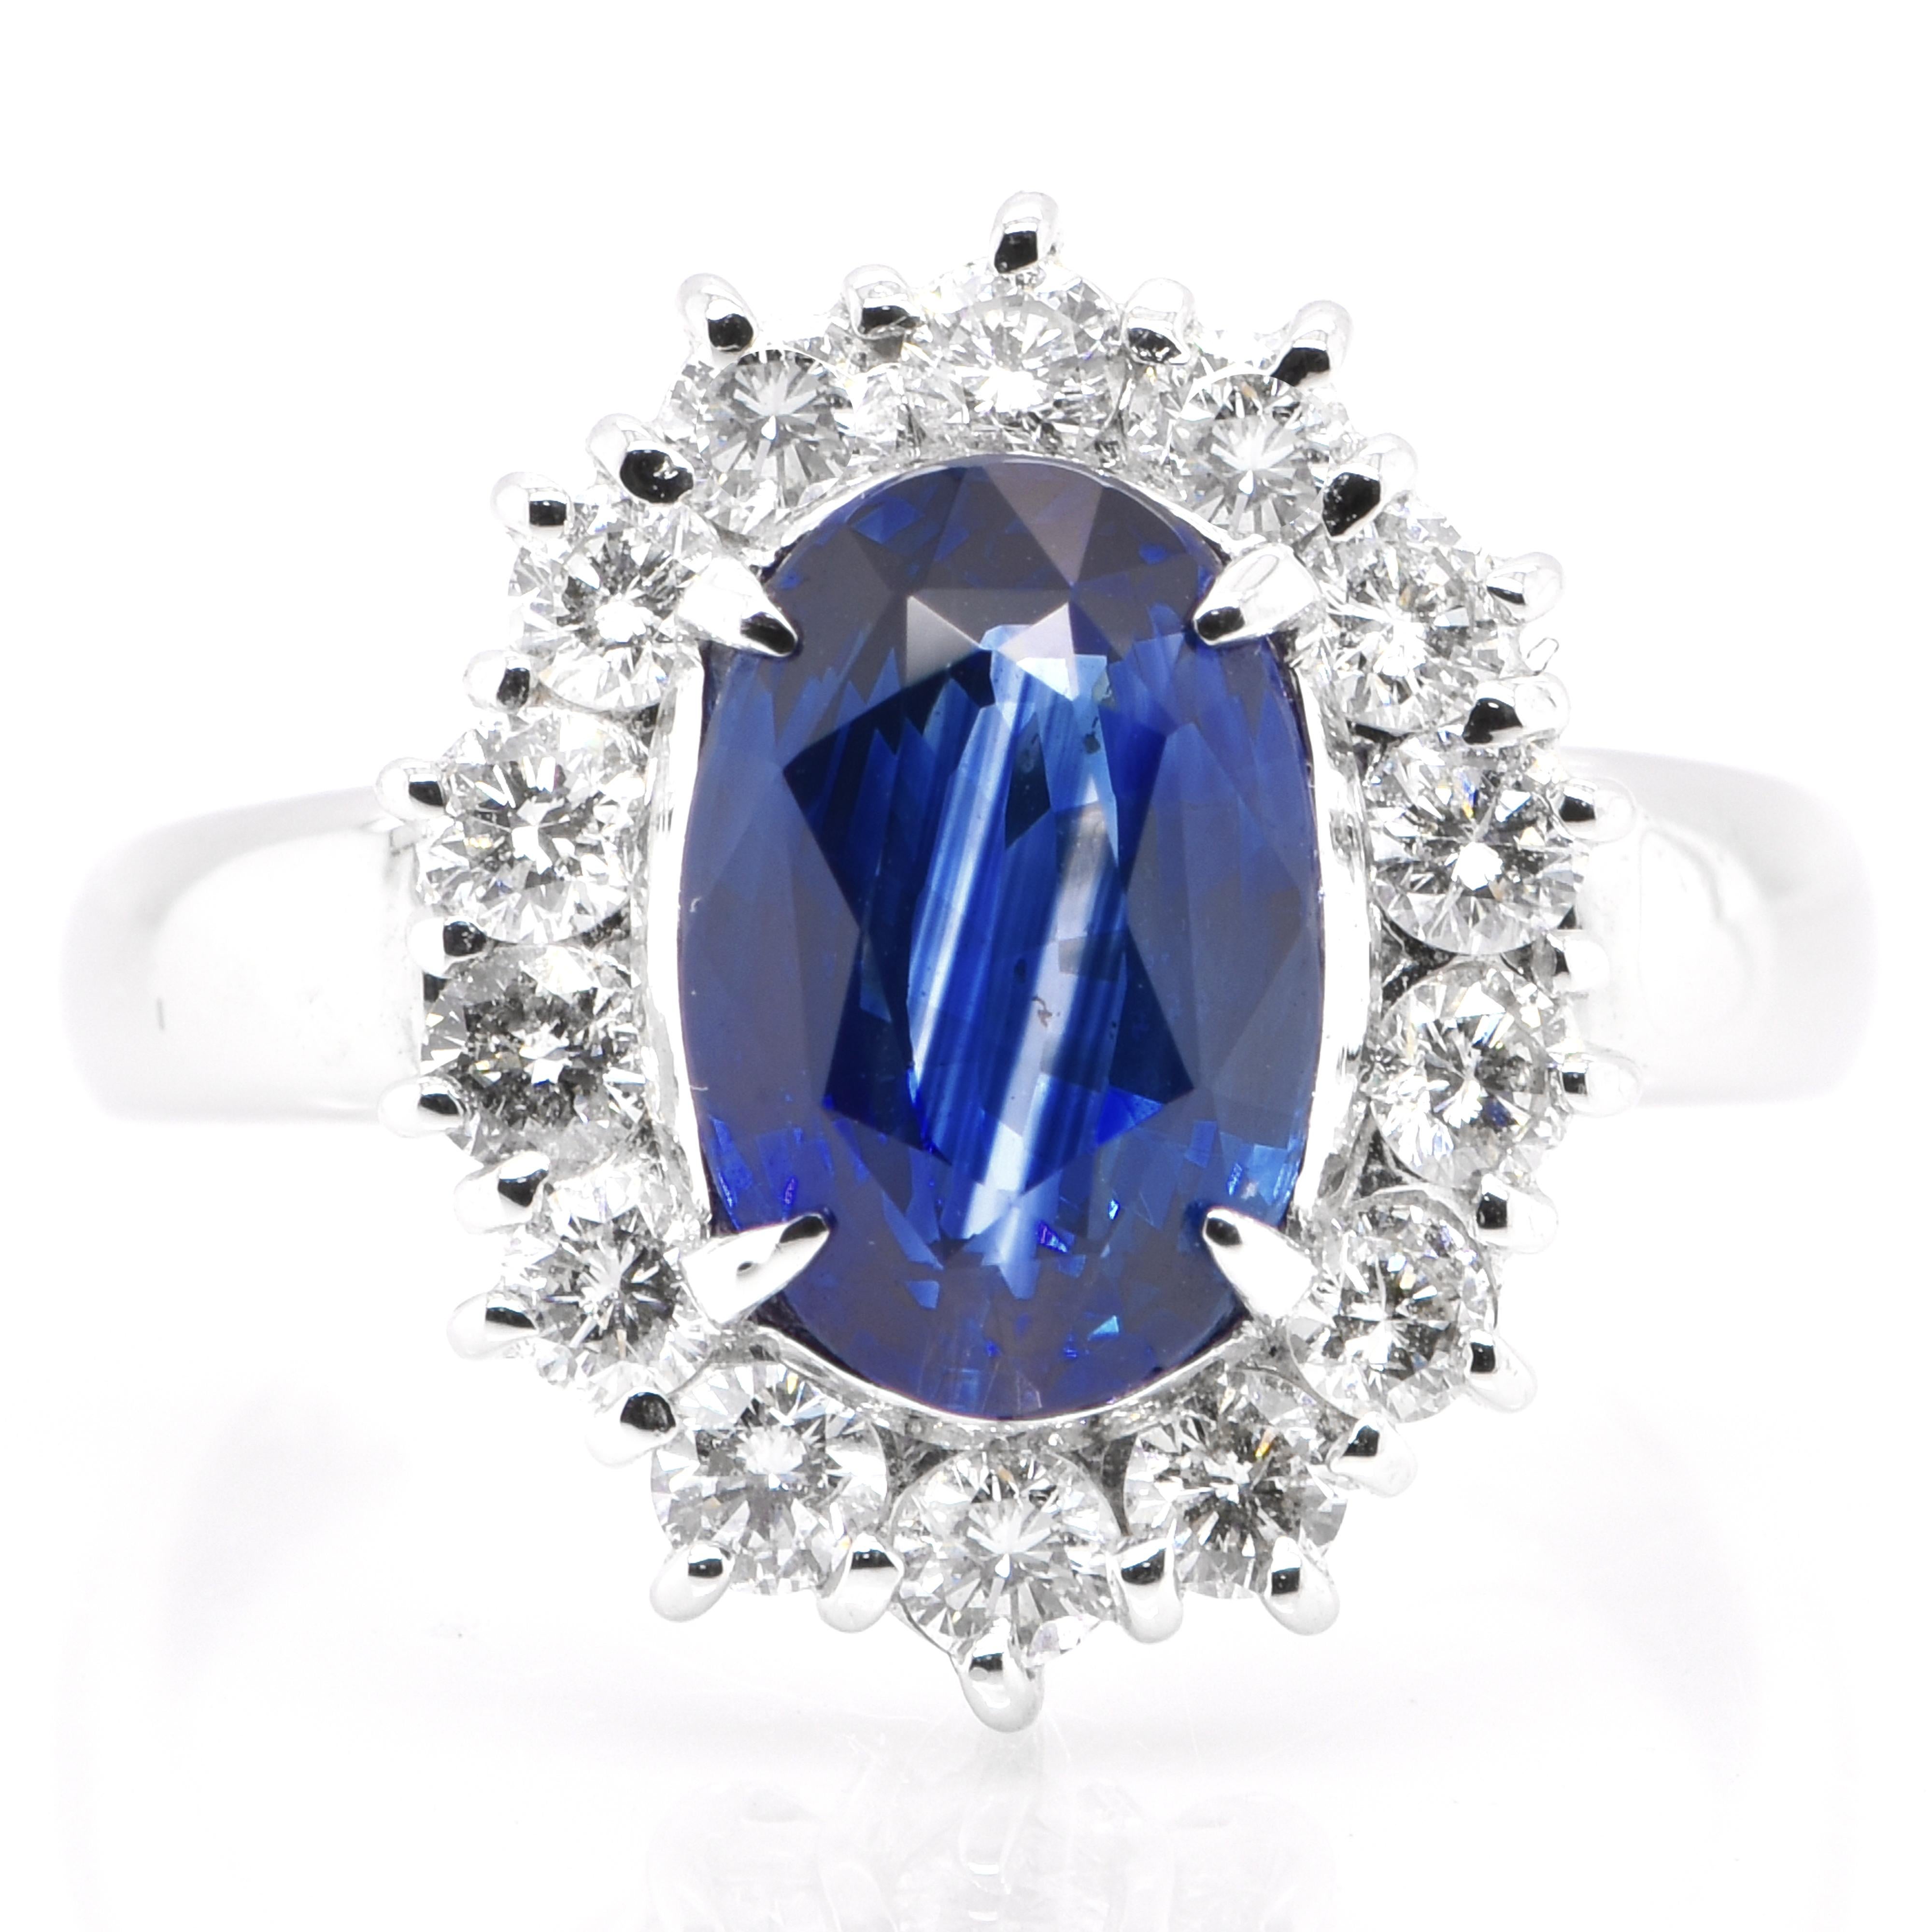 A beautiful Cocktail ring featuring a AIGS Certified 3.11 Carat Natural Unheated/Untreated Cornflower Blue Sapphire and 0.83 Carats Diamond Accents set in Platinum. Sapphires have extraordinary durability - they excel in hardness as well as